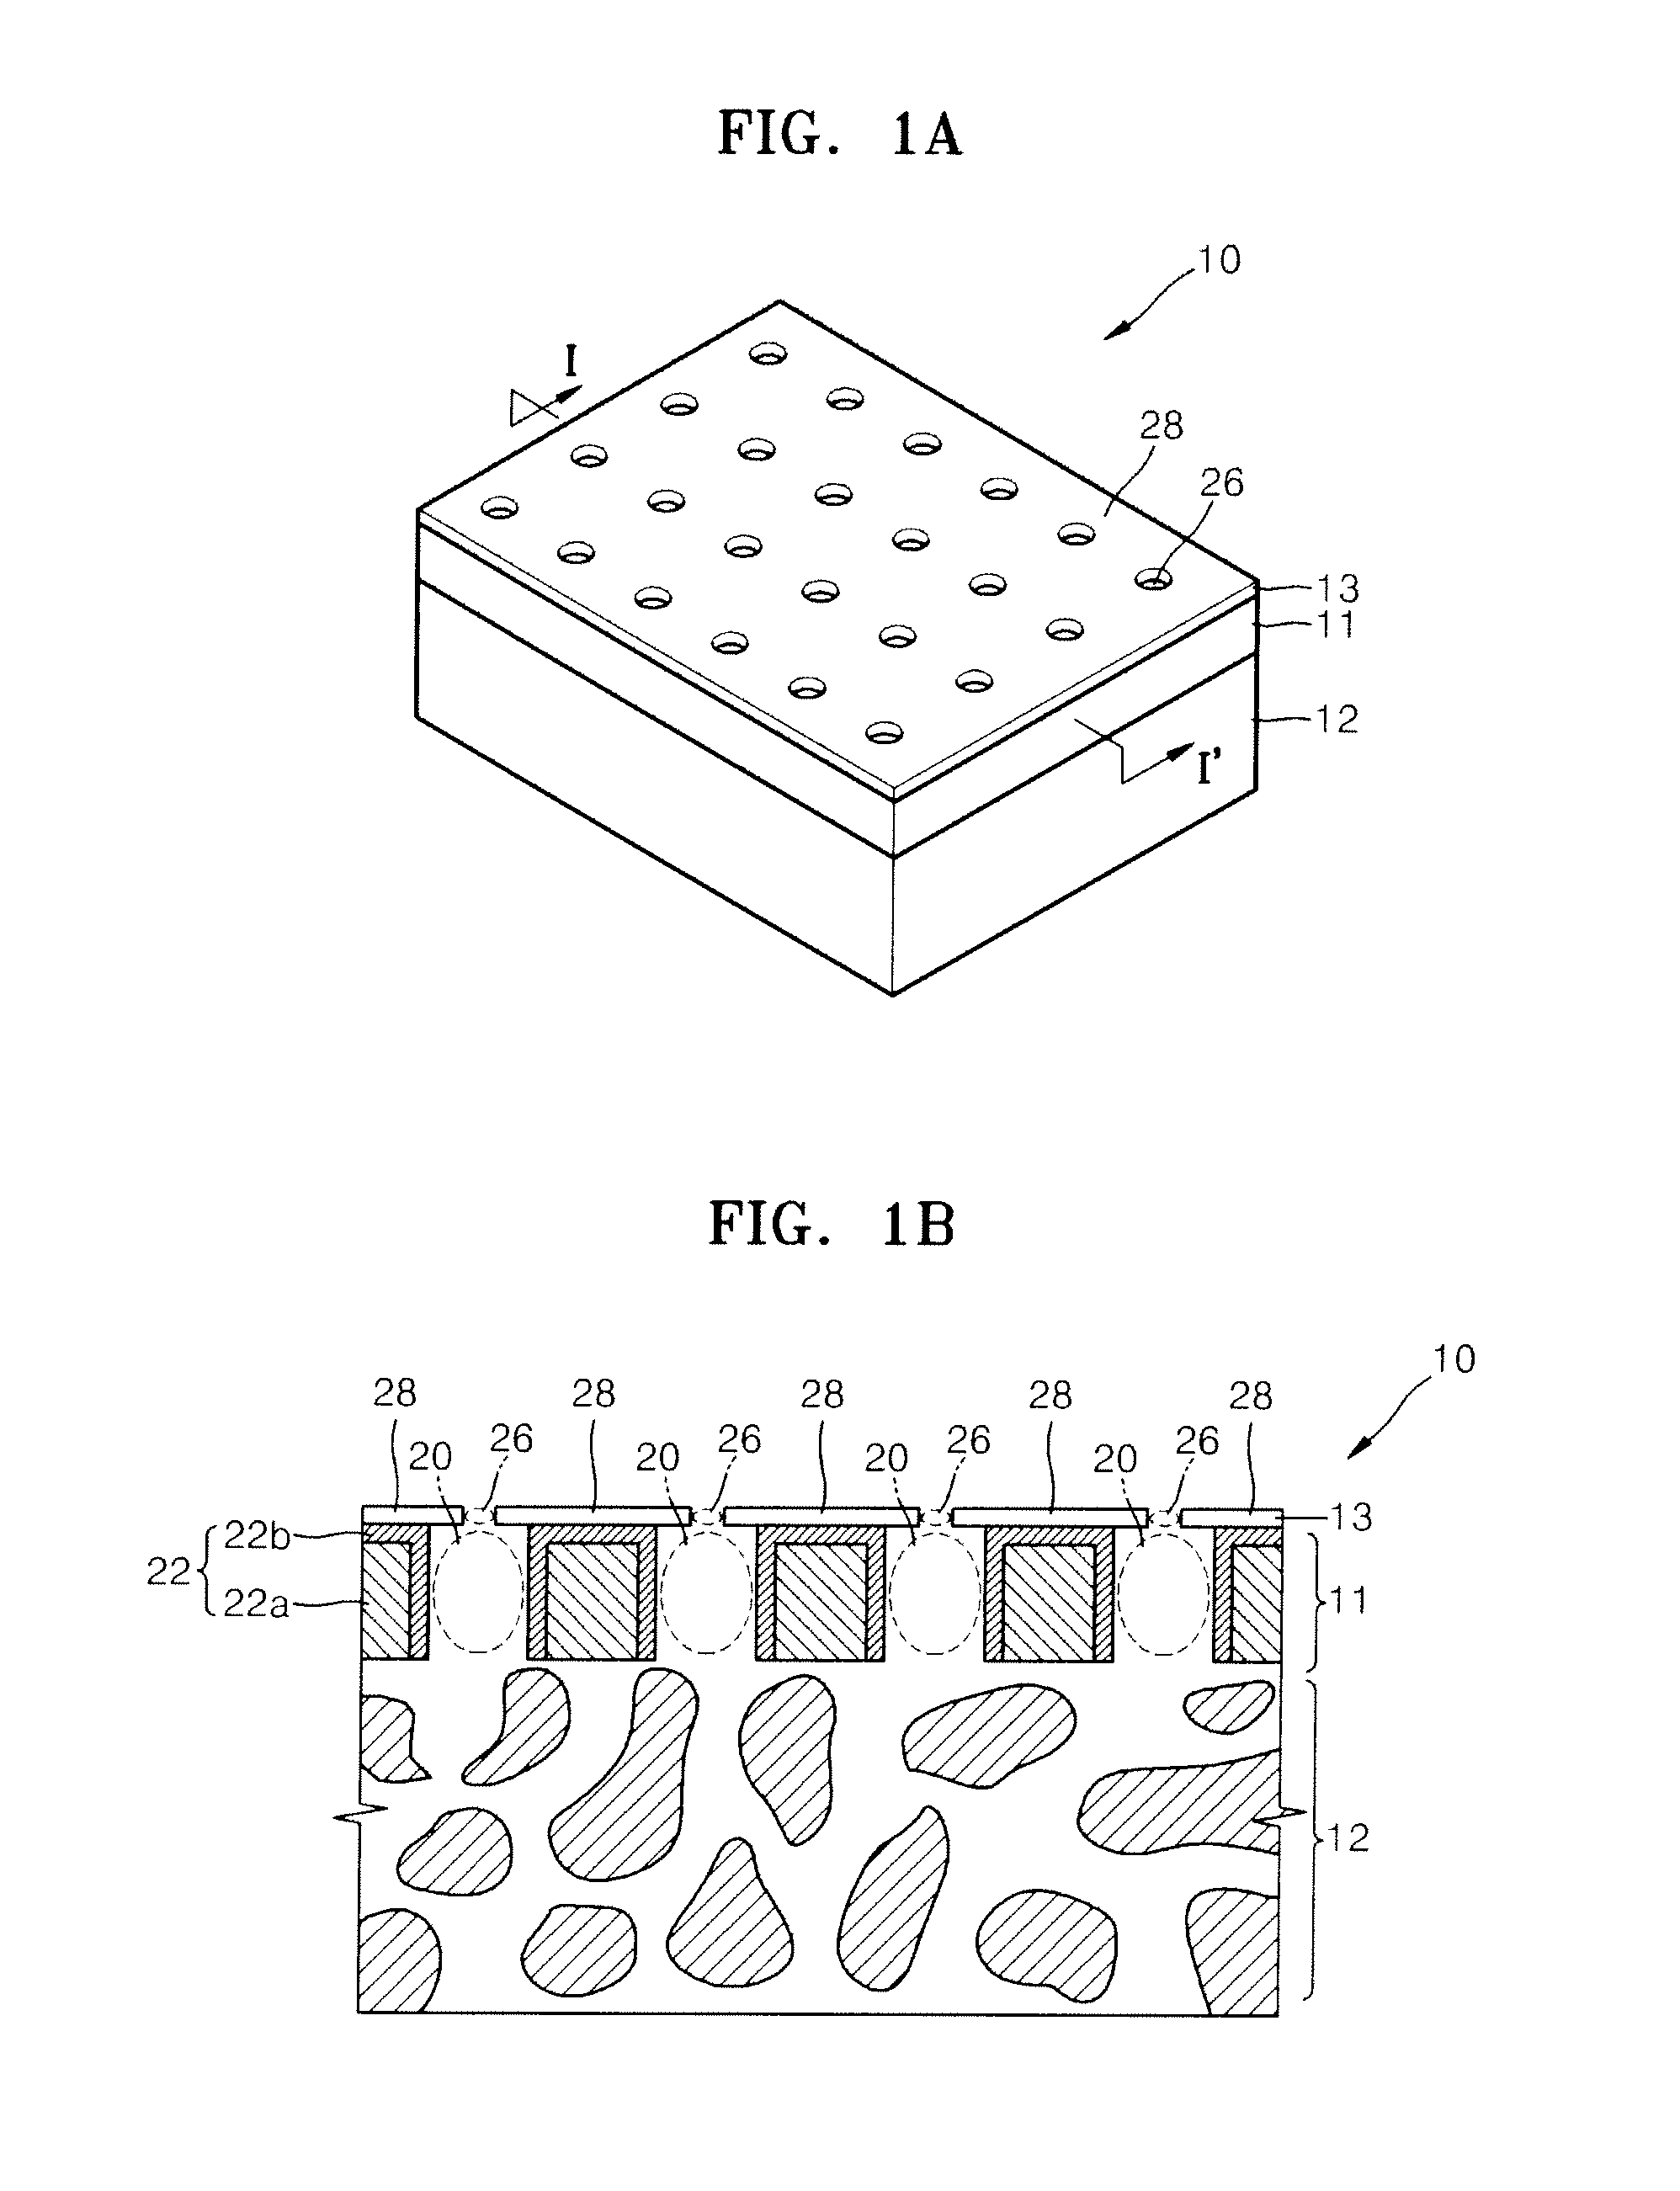 Nanoporous membrane, process of fabricating the same and device for controlled release of biopharmaceuticals comprising the same